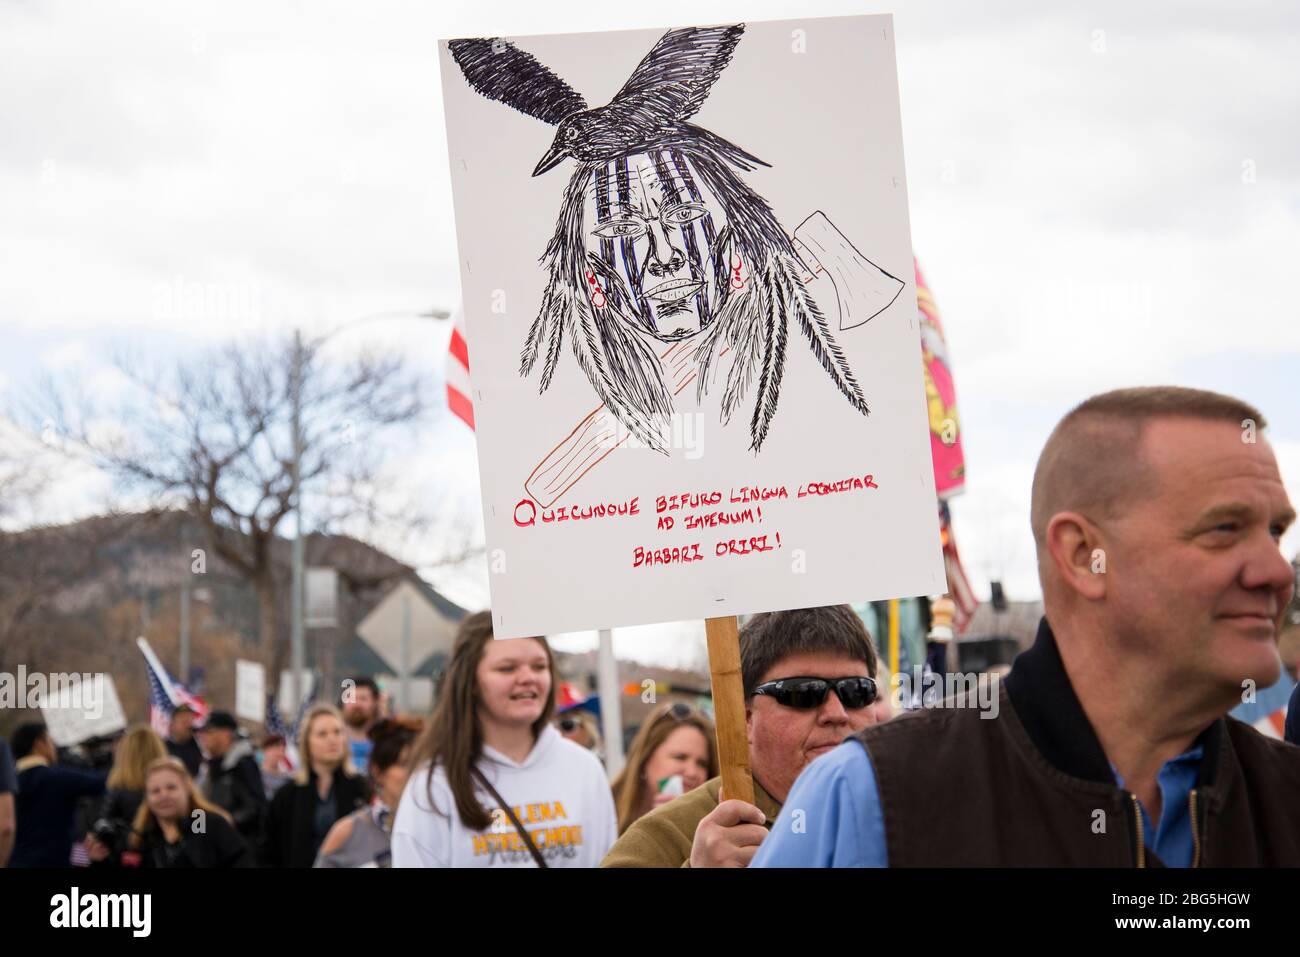 Helena, Montana - April 19, 2020: A Native American protestor holding sign that reads Government speaks with a forked tongue. Natives rise. at a prote Stock Photo